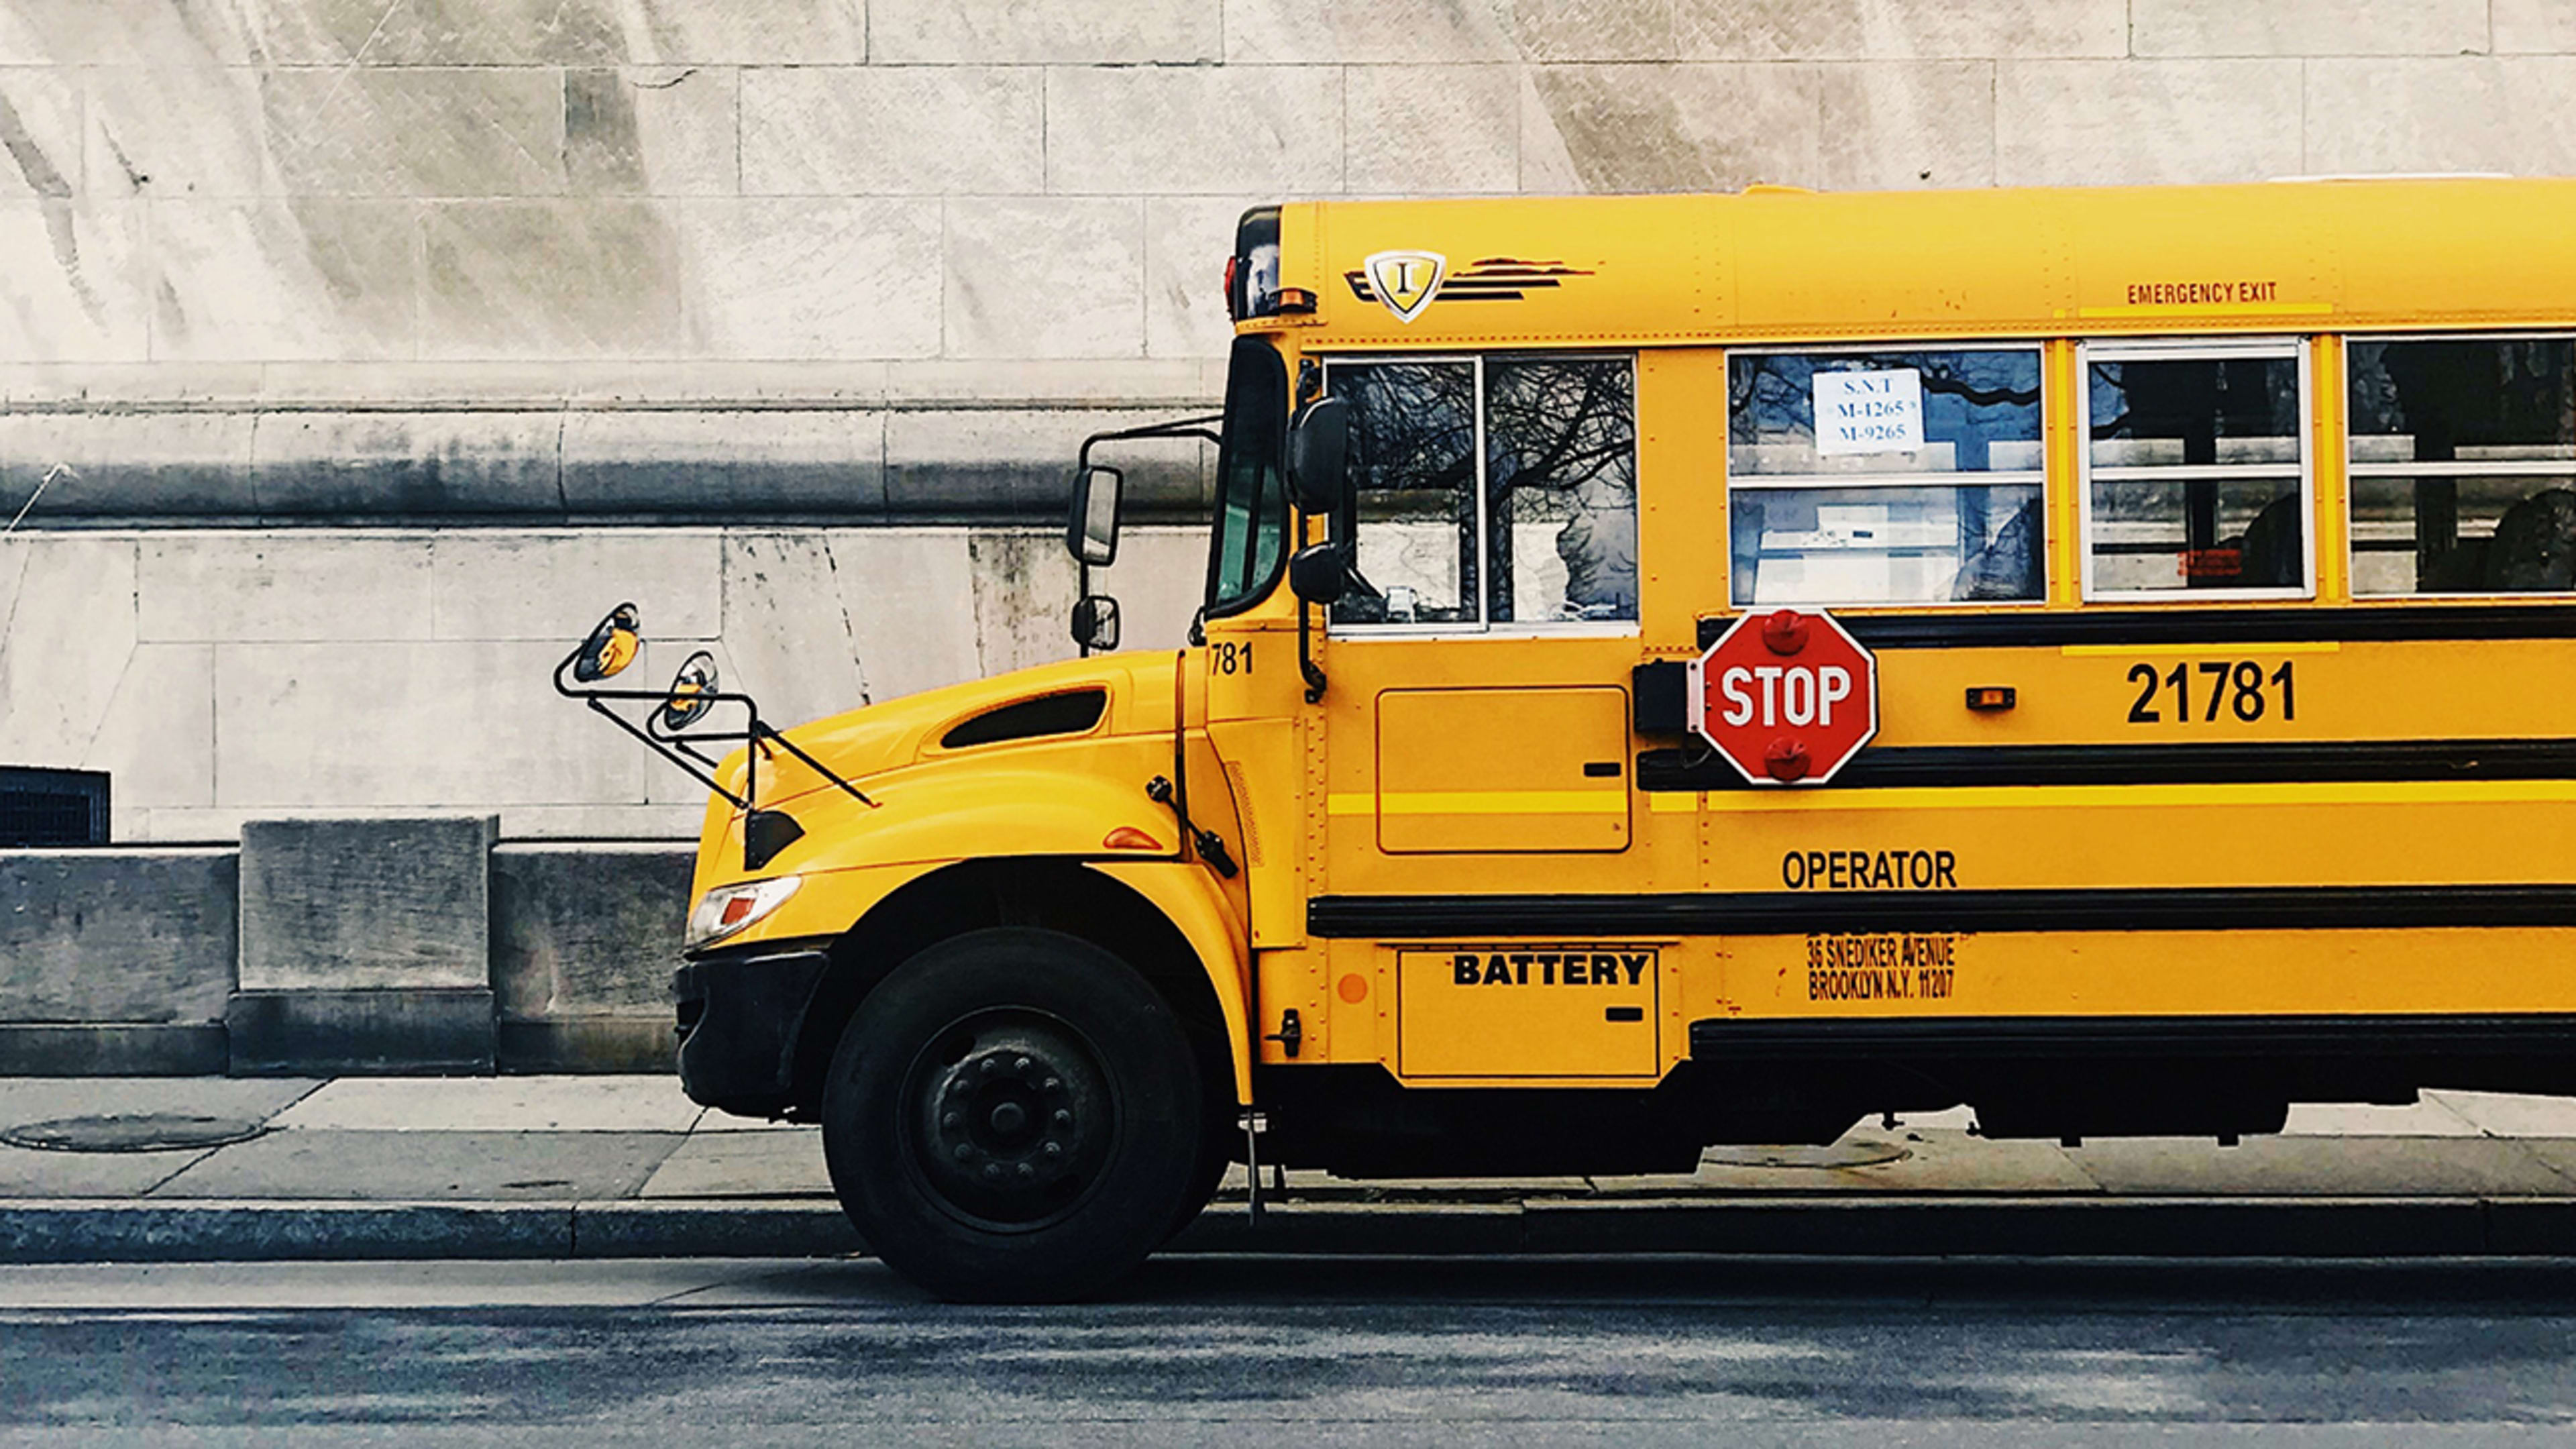 Regulators order self-driving school bus test to be stopped